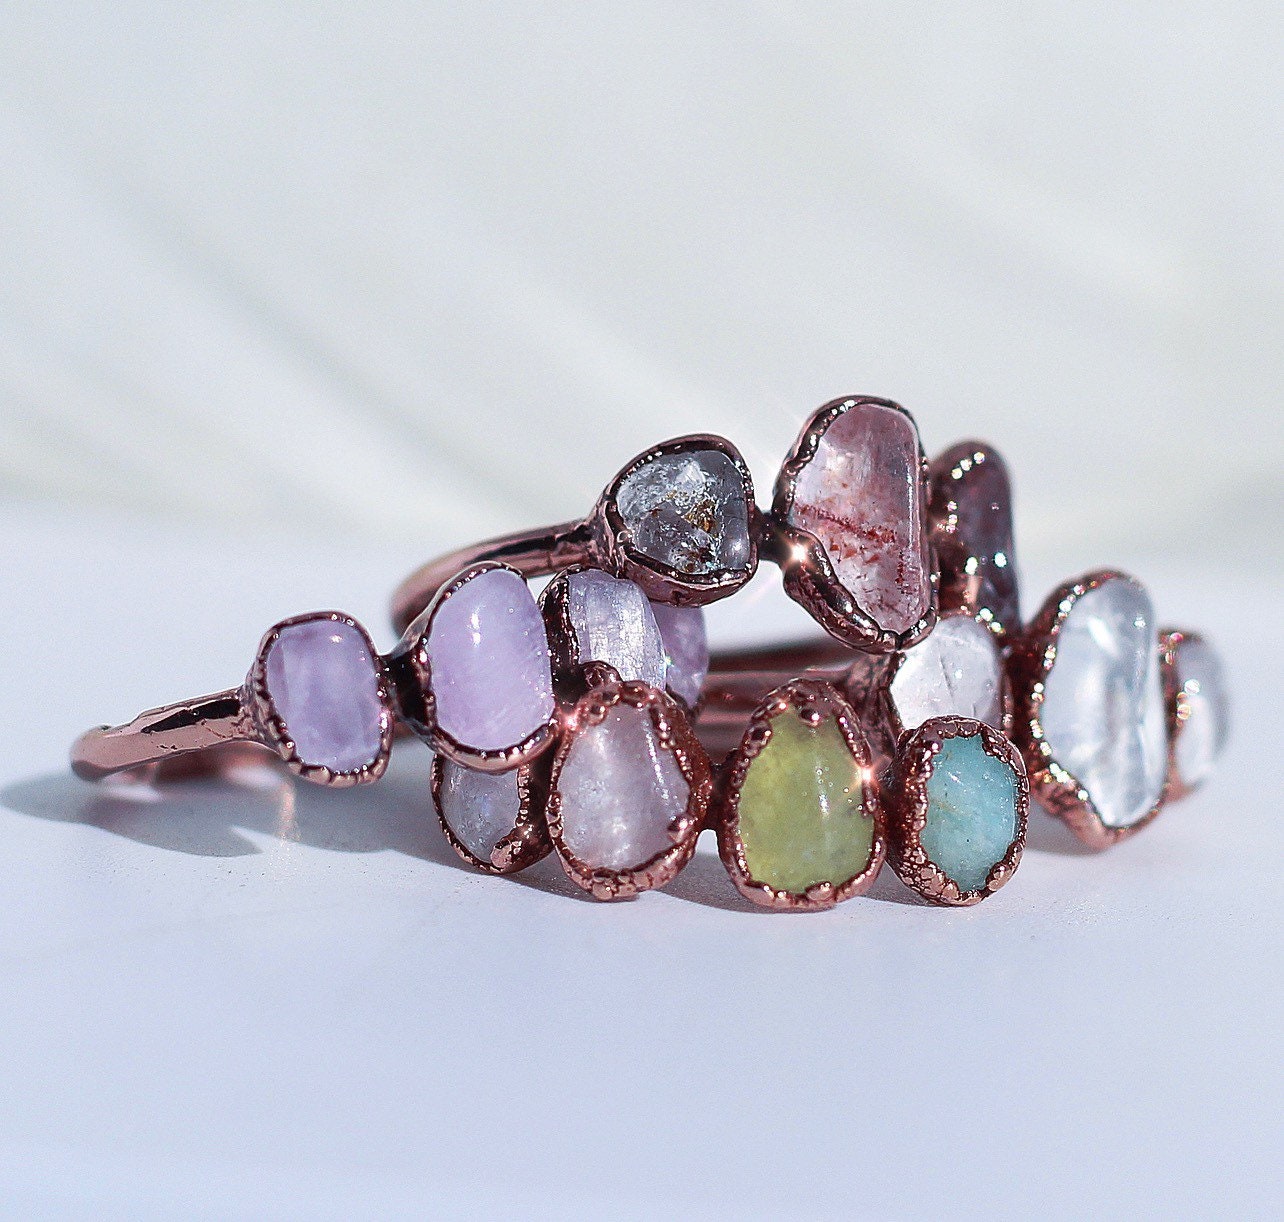 Super Seven Ring, Melody Stone Ring, Purple Healing Stone Ring, Protection Jewelry, Super 7 Crystal Raw, Sacred Seven Stone, Sacred 7 Ring